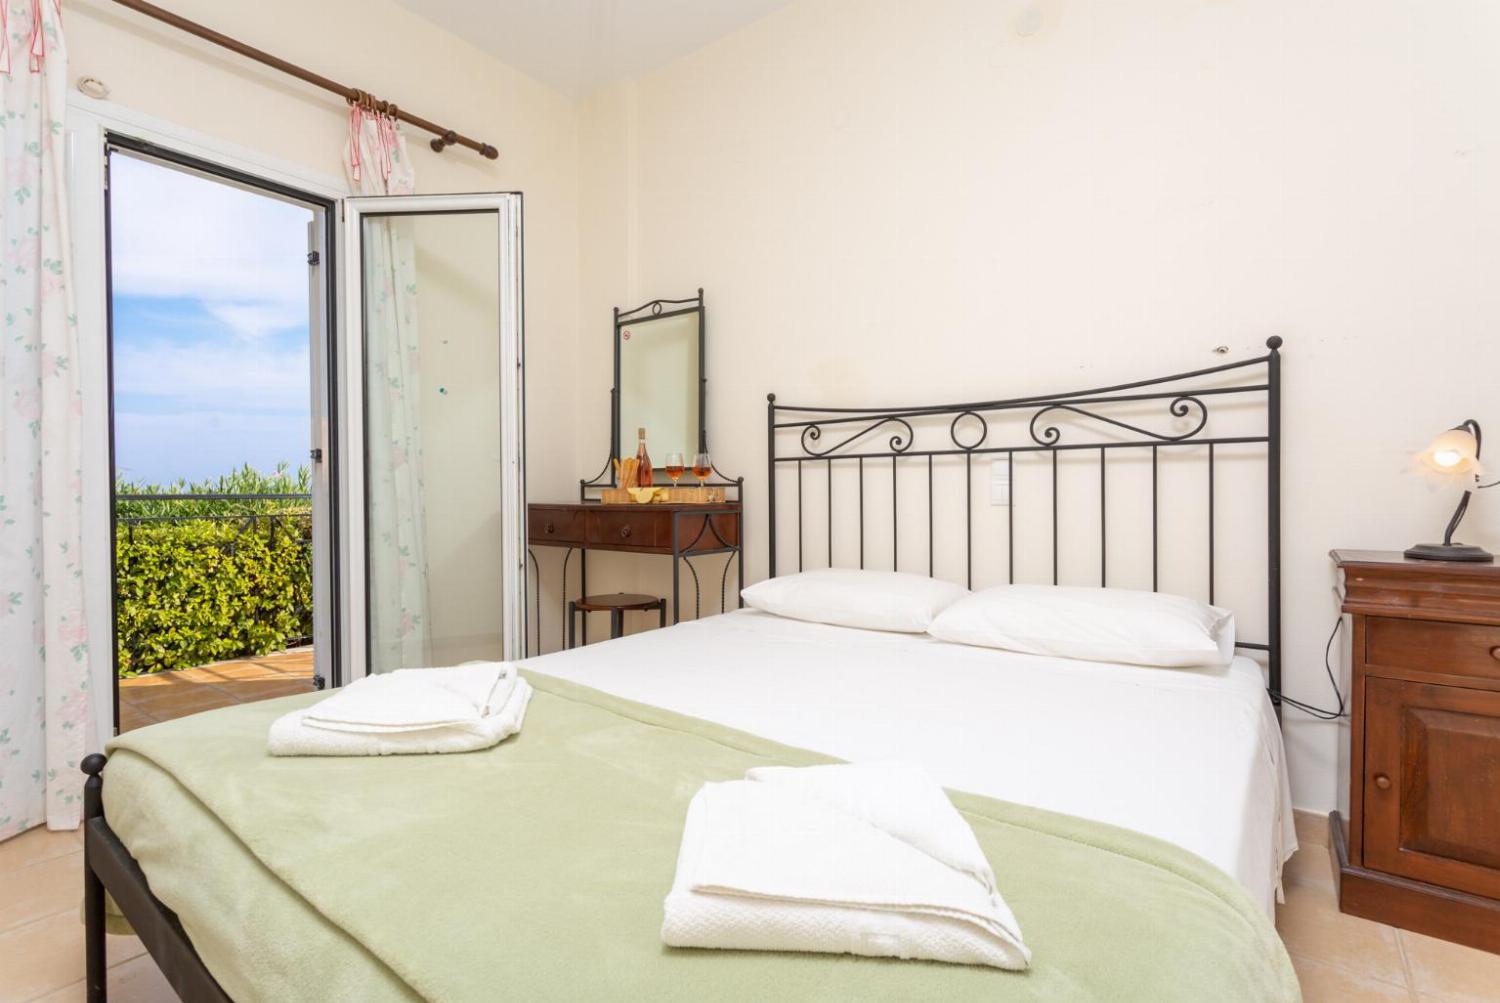 Double bedroom on ground floor with en suite bathroom, A/C and balcony access